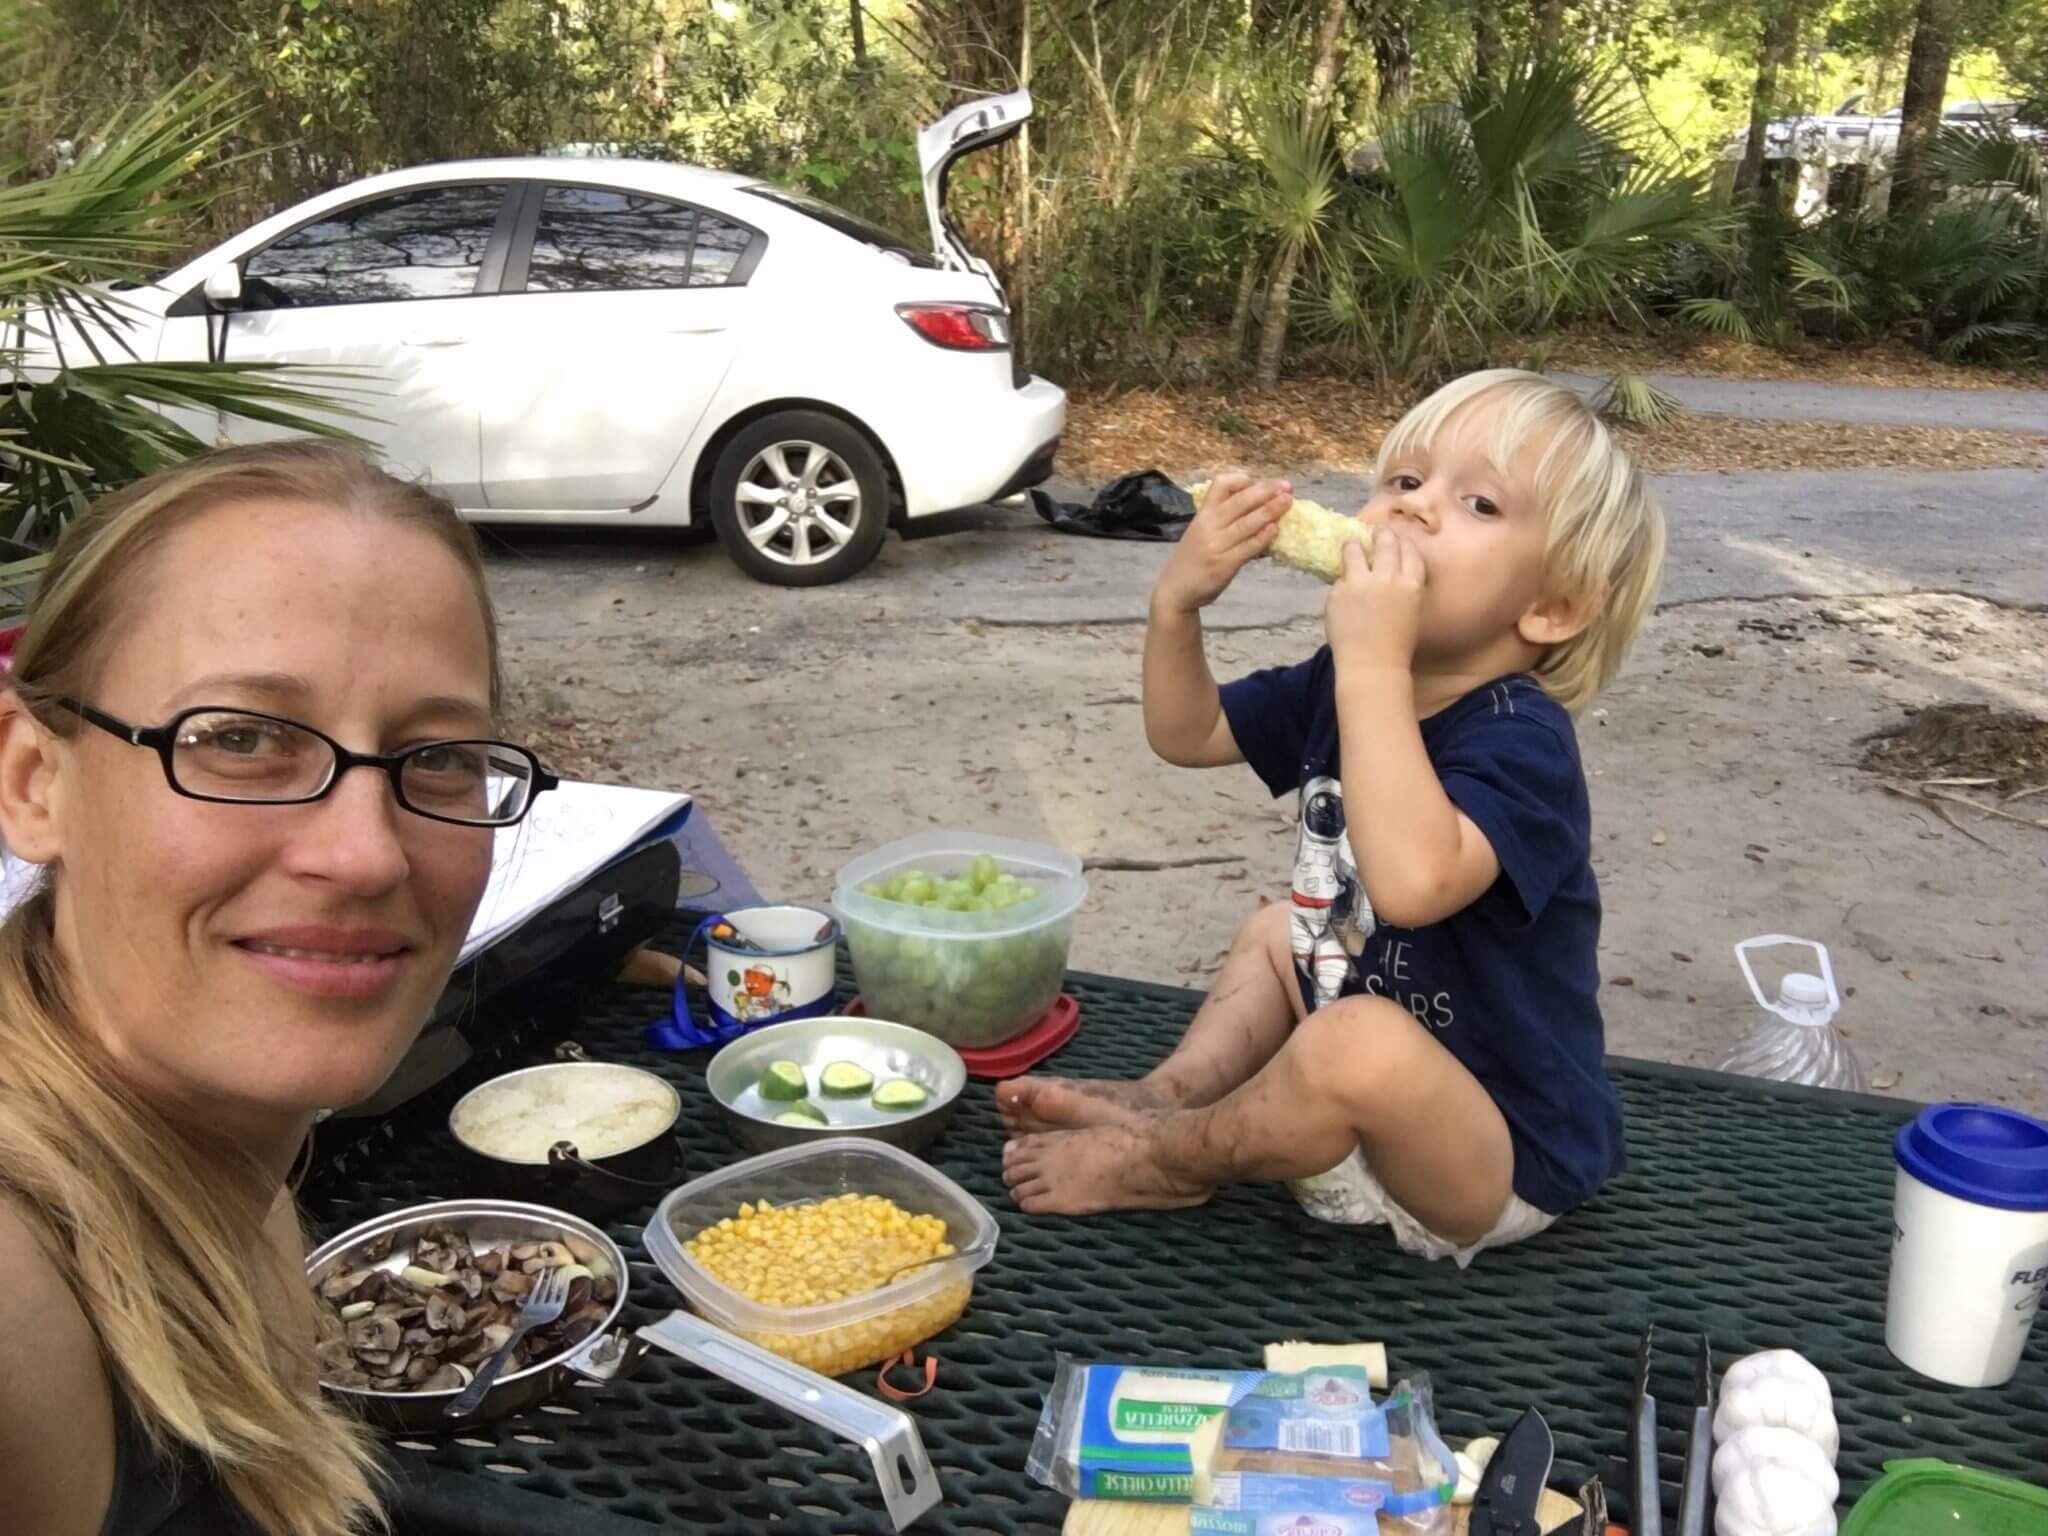 Keep food simple when tent camping with a toddler. For more Family Travel Tips, join us at www.HuntingforRubies.com